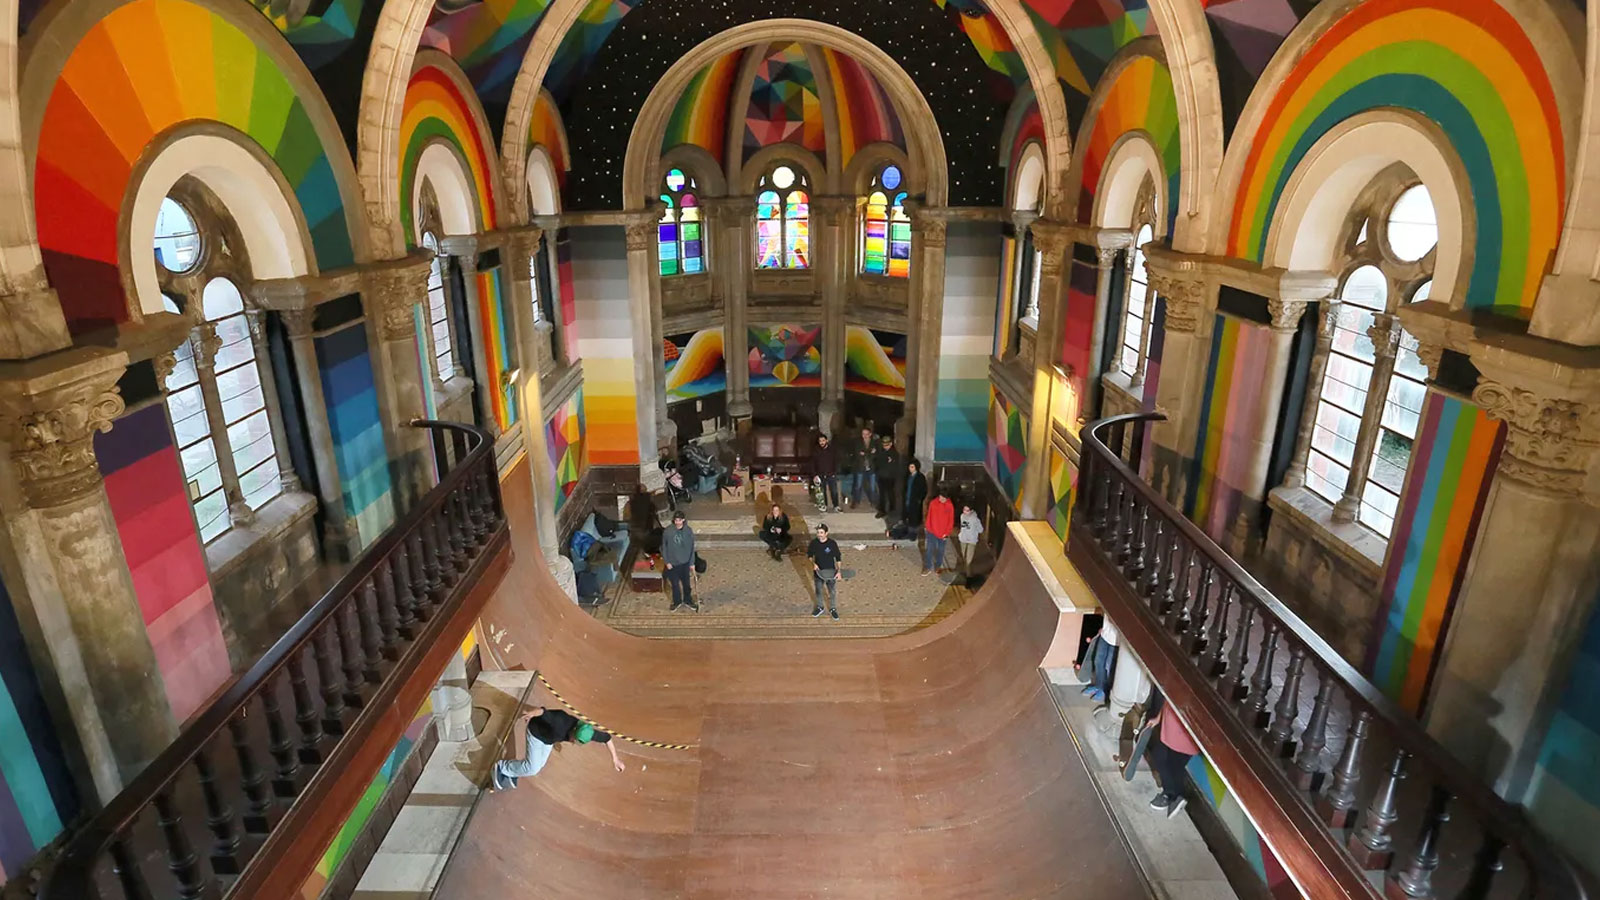 A 100-year-old church was transformed into Las Iglesia skatepark in Llanera, Spain.— Getty Images